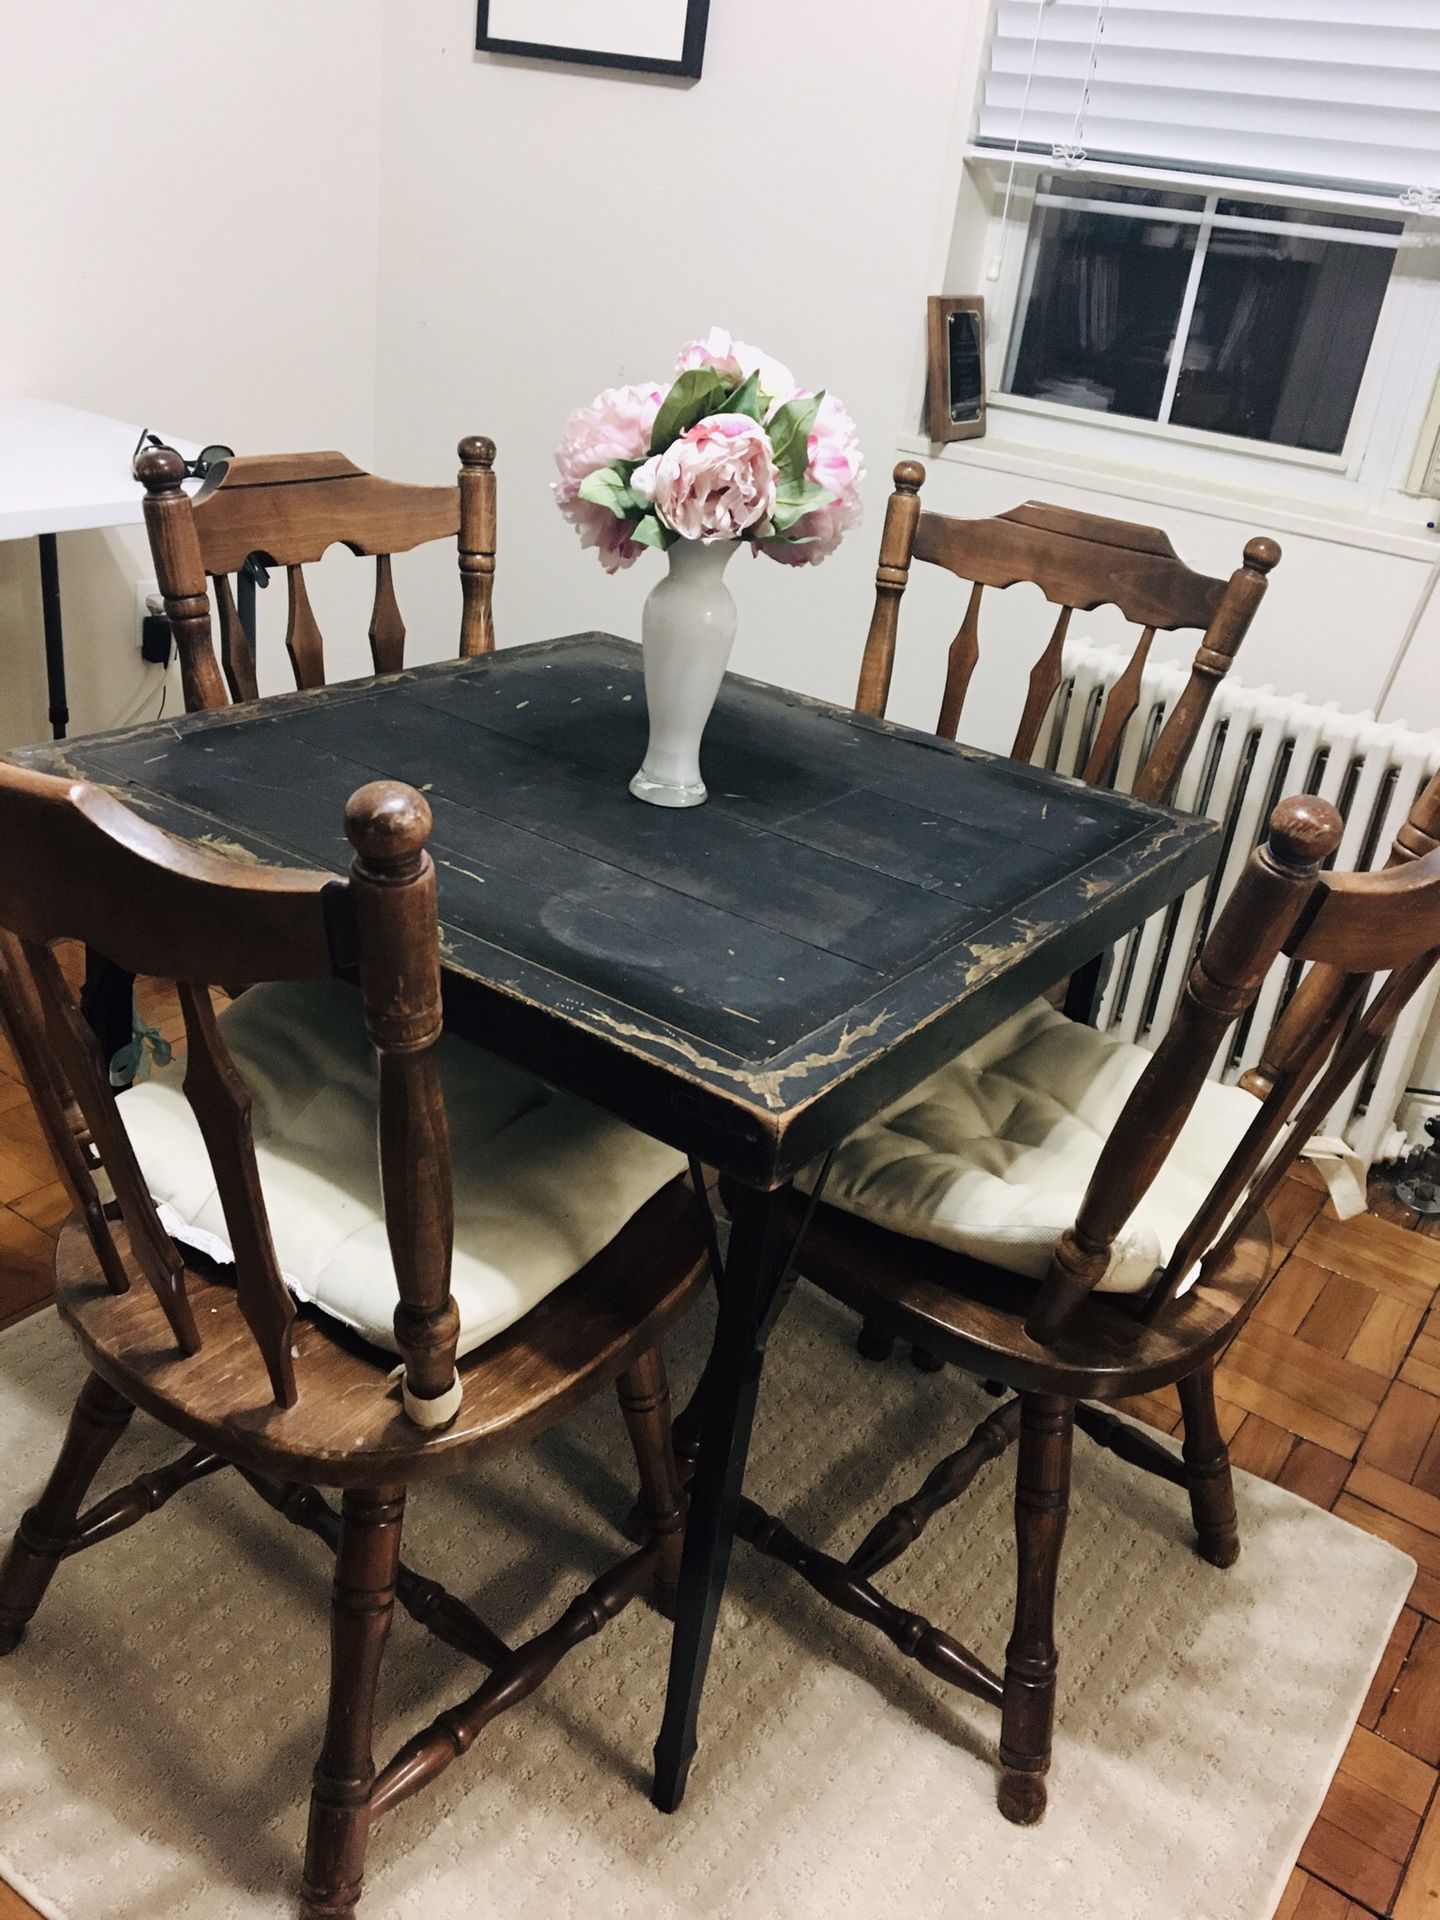 Free table and 4 chairs